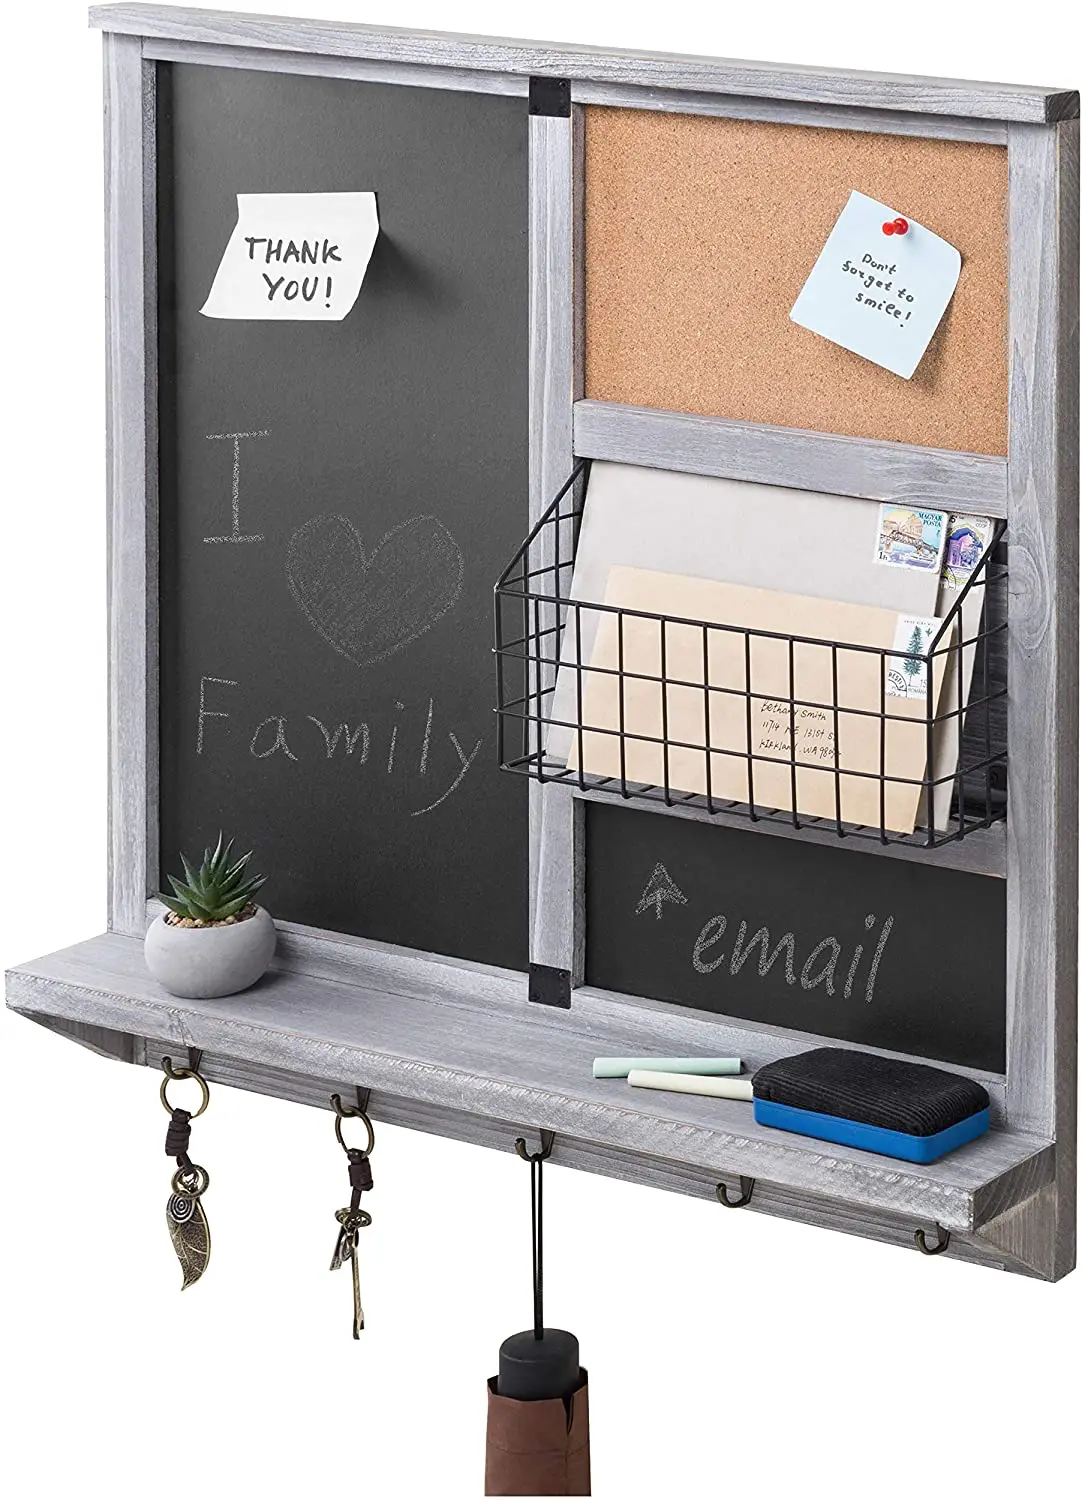 Wall Mounted Vintage Gray Wood Chalkboard/Cork Board Sign with Mail Basket Shelf, and 5 Key Hooks Decor